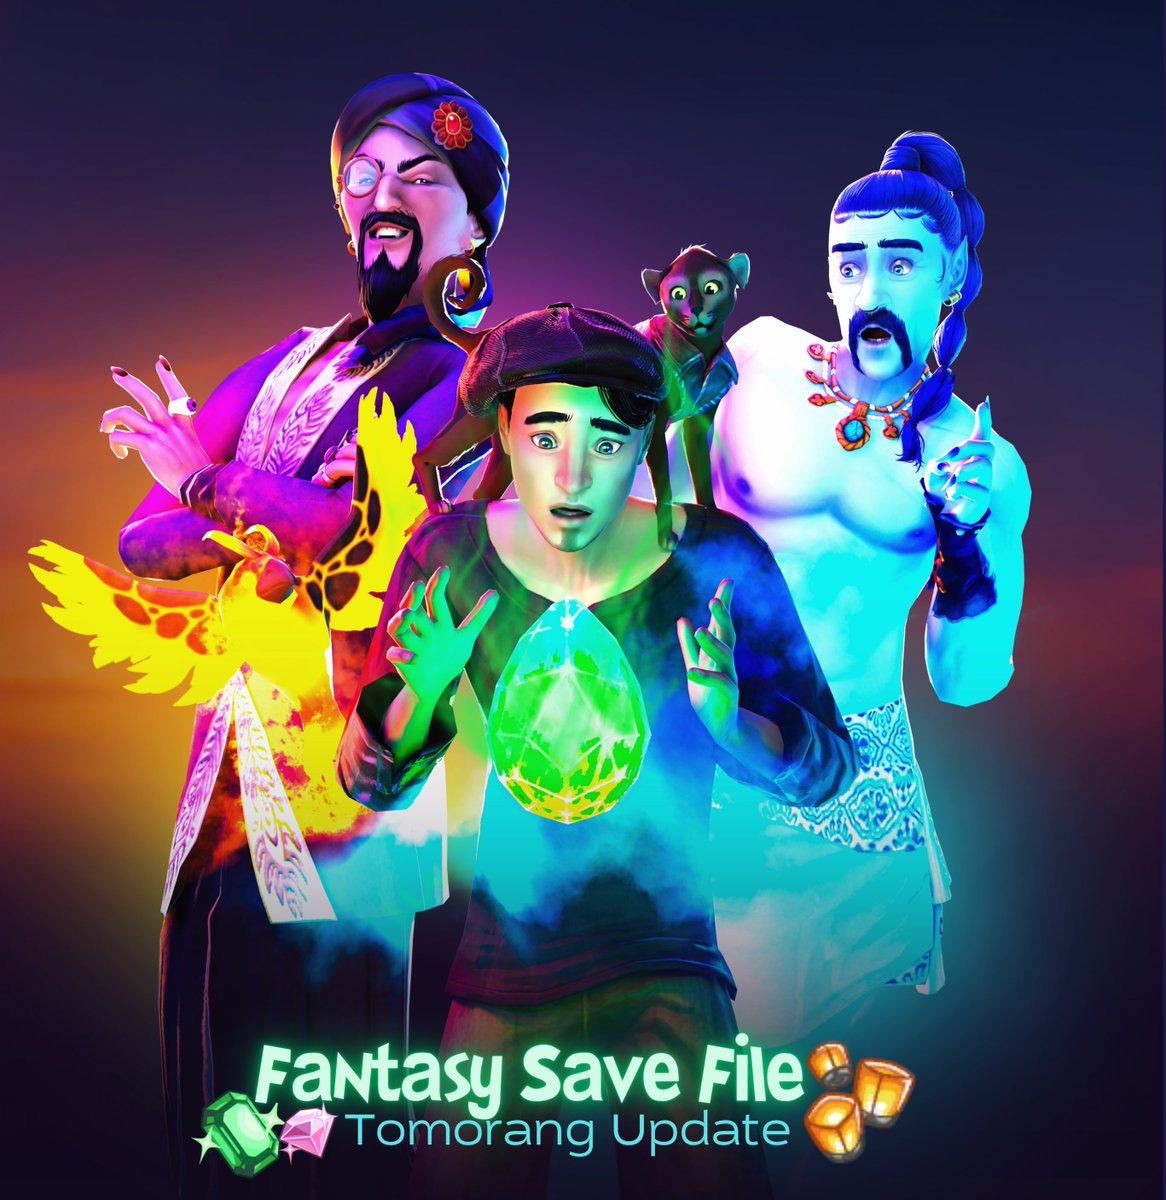 ✨Sims 4 Fantasy Save File✨ #EApartner #ad 🧞Updated to include Tomorang!🪔 Download 🔗patreon.com/posts/sims-4-f… Includes all the worlds: 🌎22 Residential worlds 🏖️ 2 Holiday Worlds Thank you to @draufilm for the beautiful render for this update!